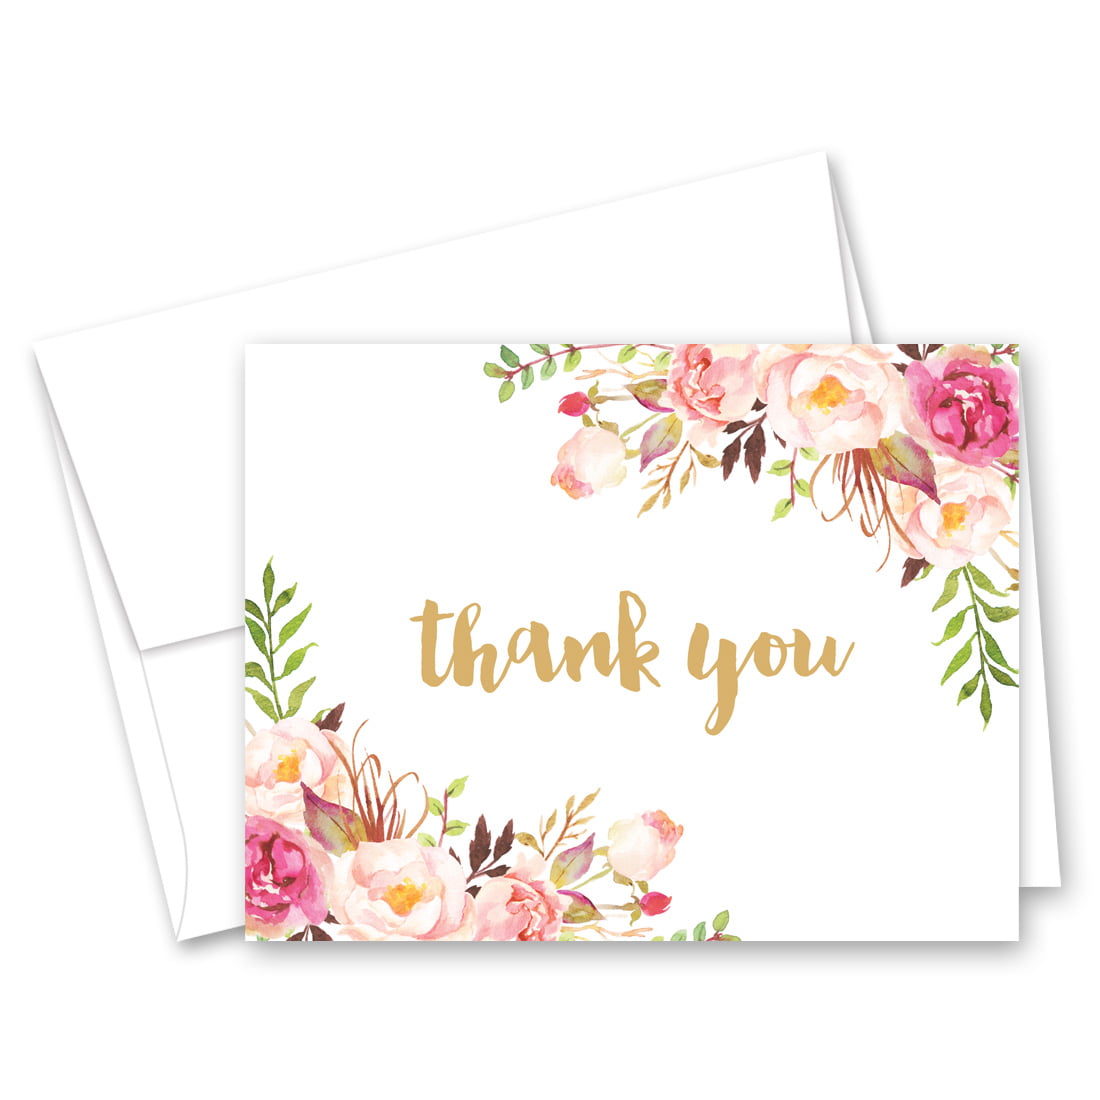 Details about   THANK YOU CARD Flowers Artsy Hallmark Greeting Card Thank You Pretty 